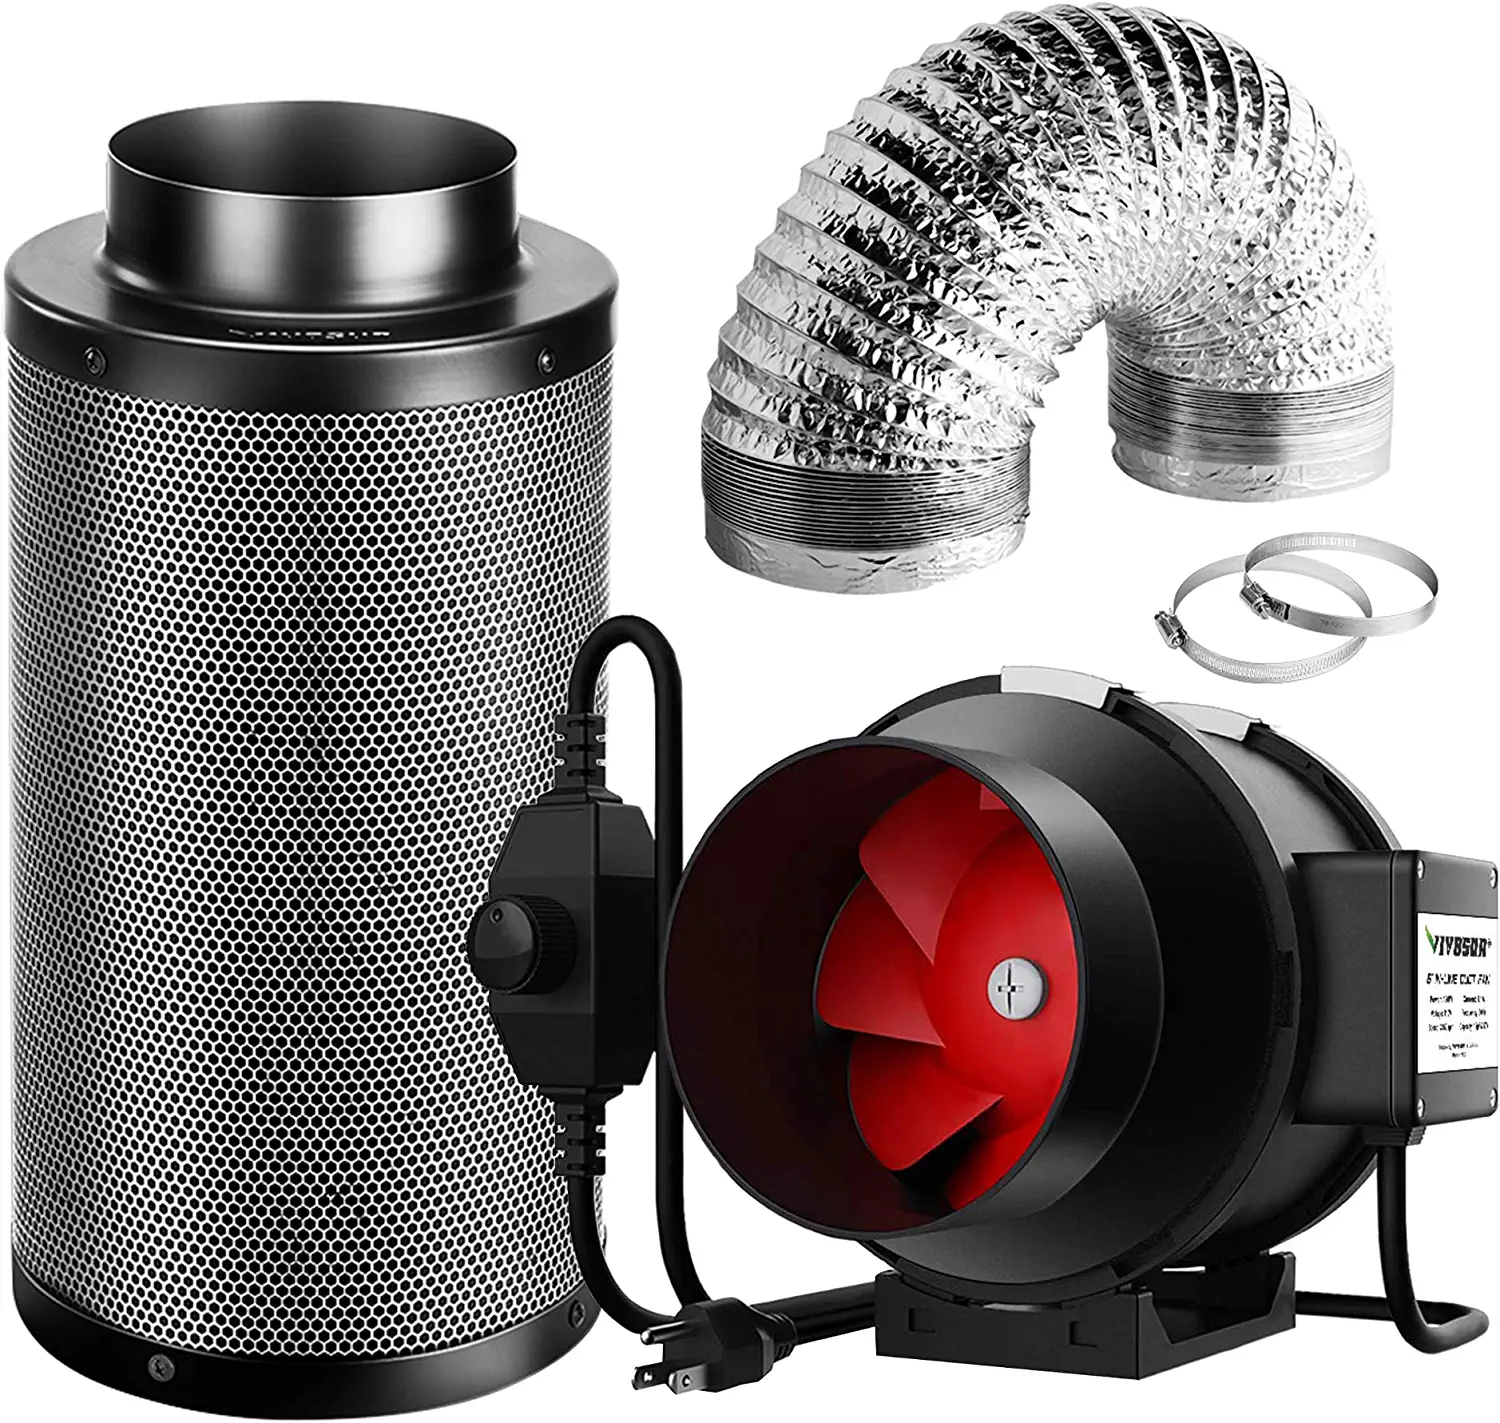 VIVOSUN 6-Inch 390 CFM Inline Duct Fan Kit with Black Carbon Filter and Ducting